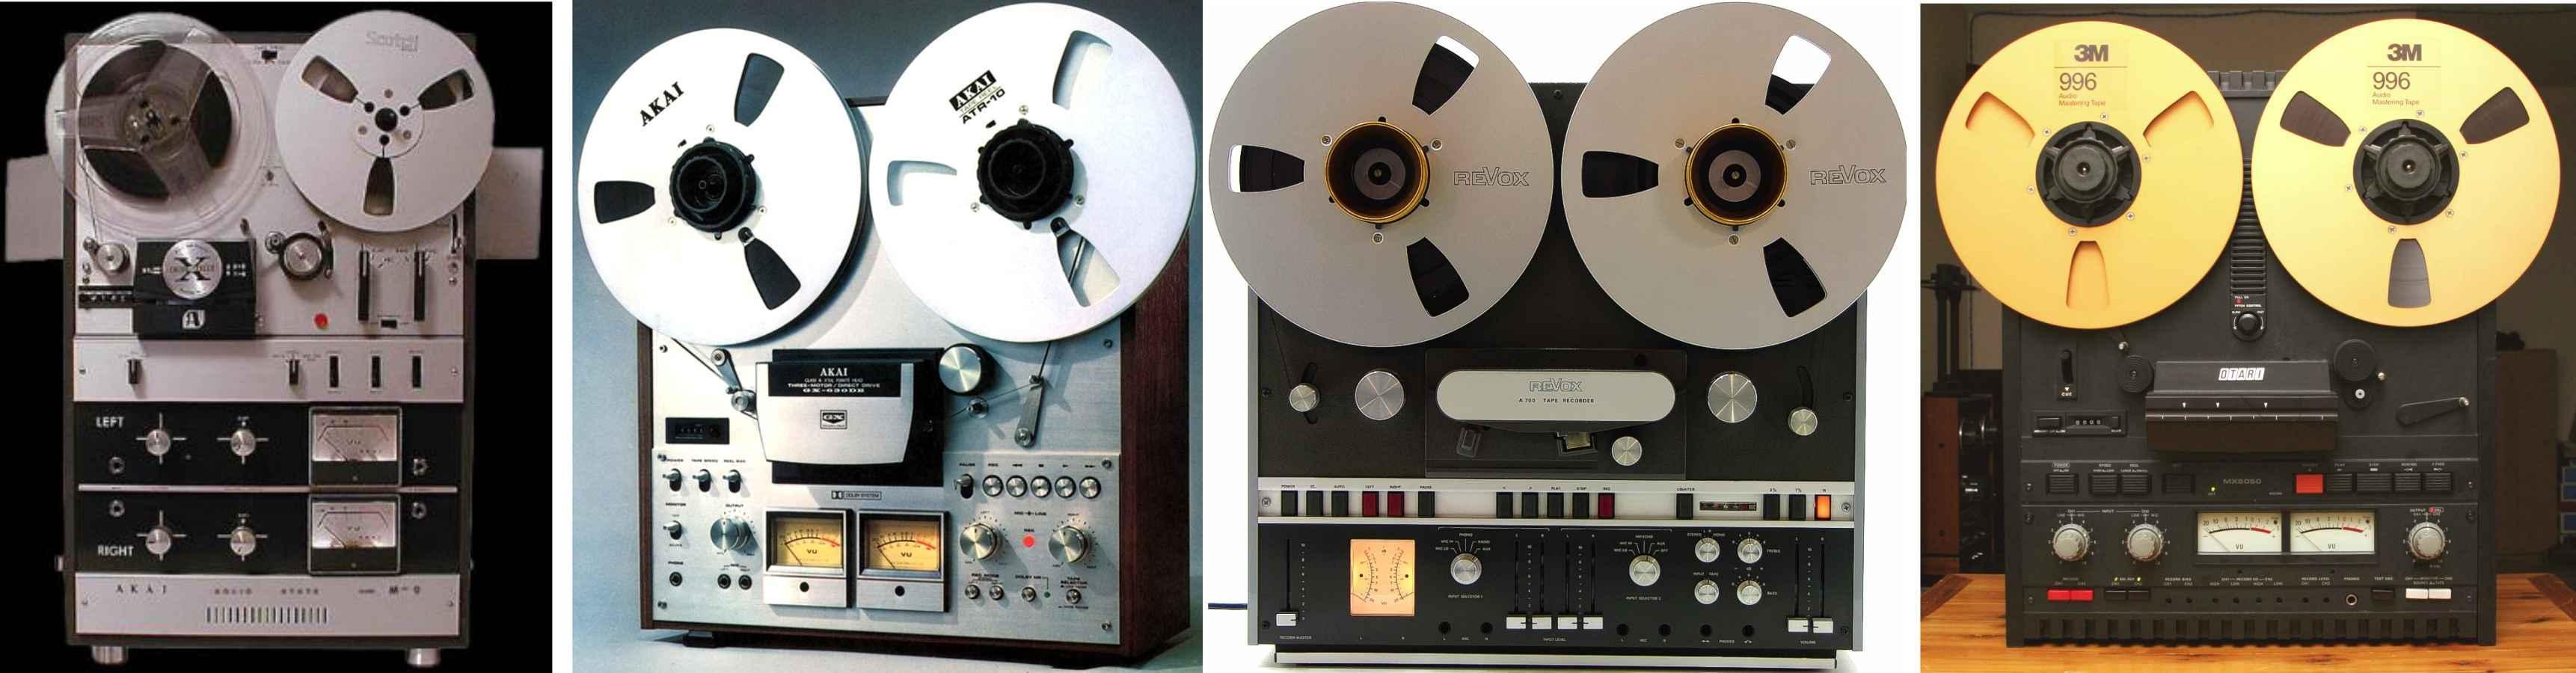 Revox A700 tape recorder FULL electronic capacitor and preset